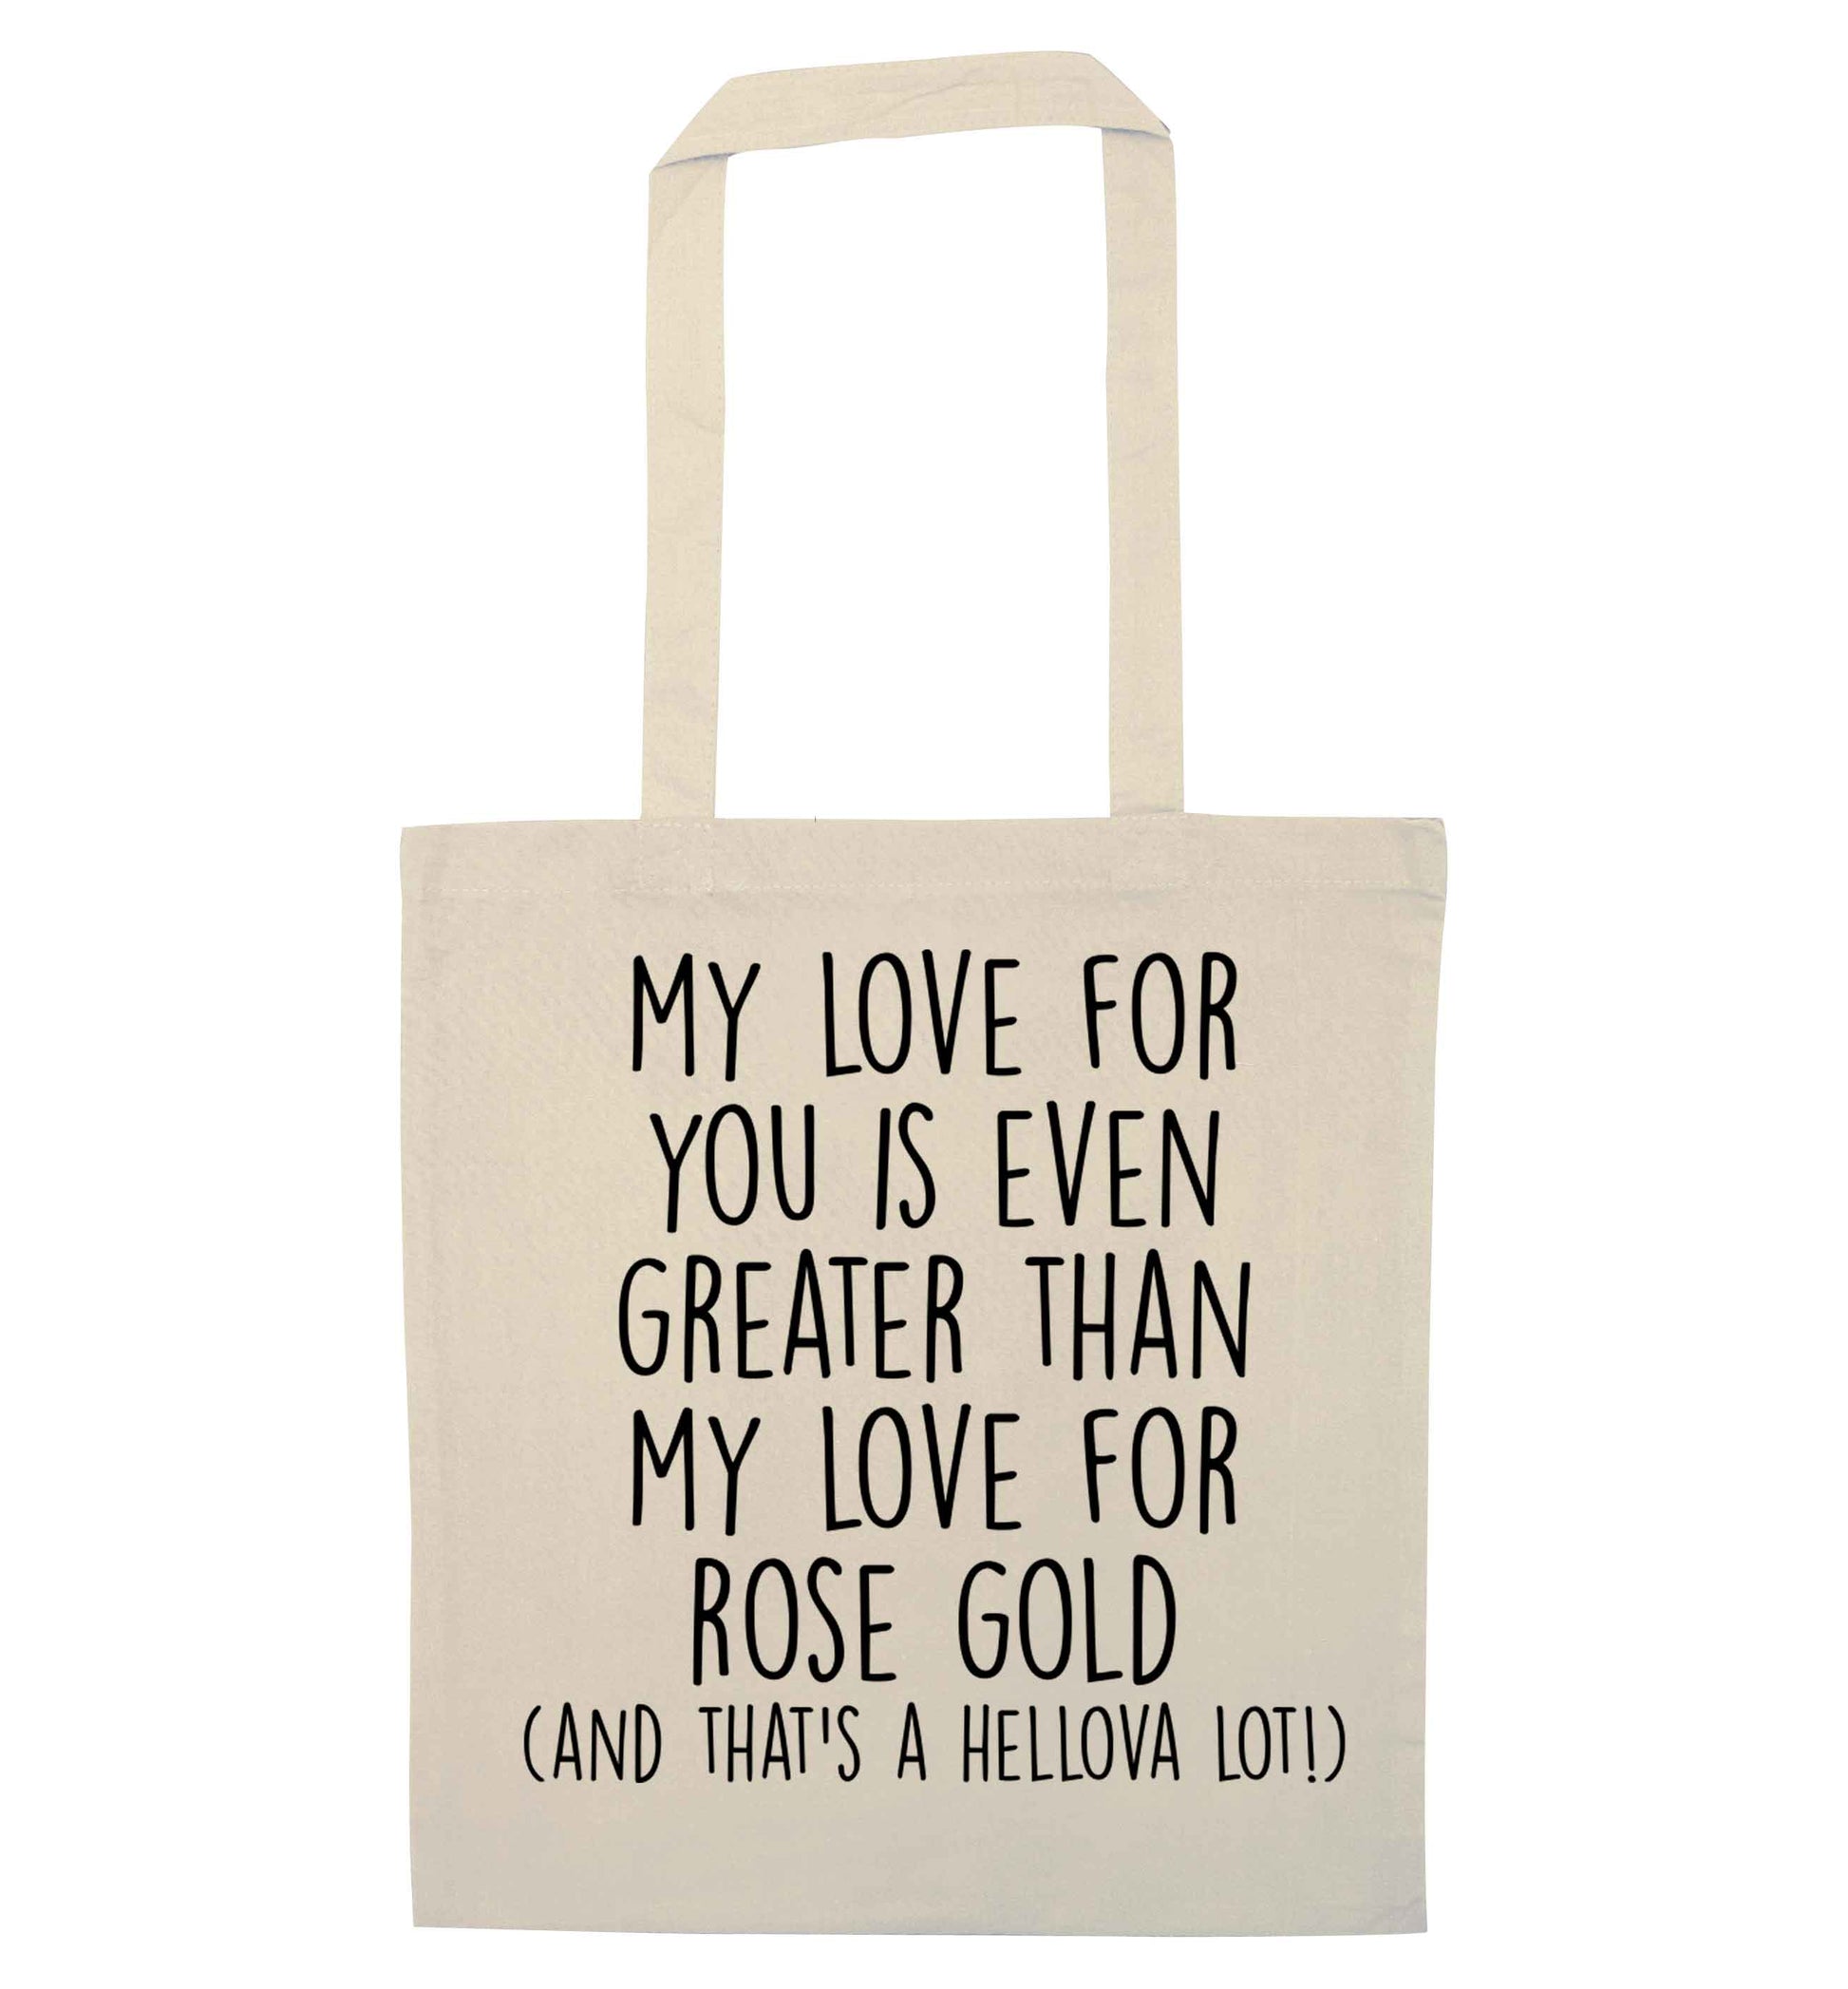 My love for you is even greater than my love for rose gold (and that's a hellova lot) natural tote bag